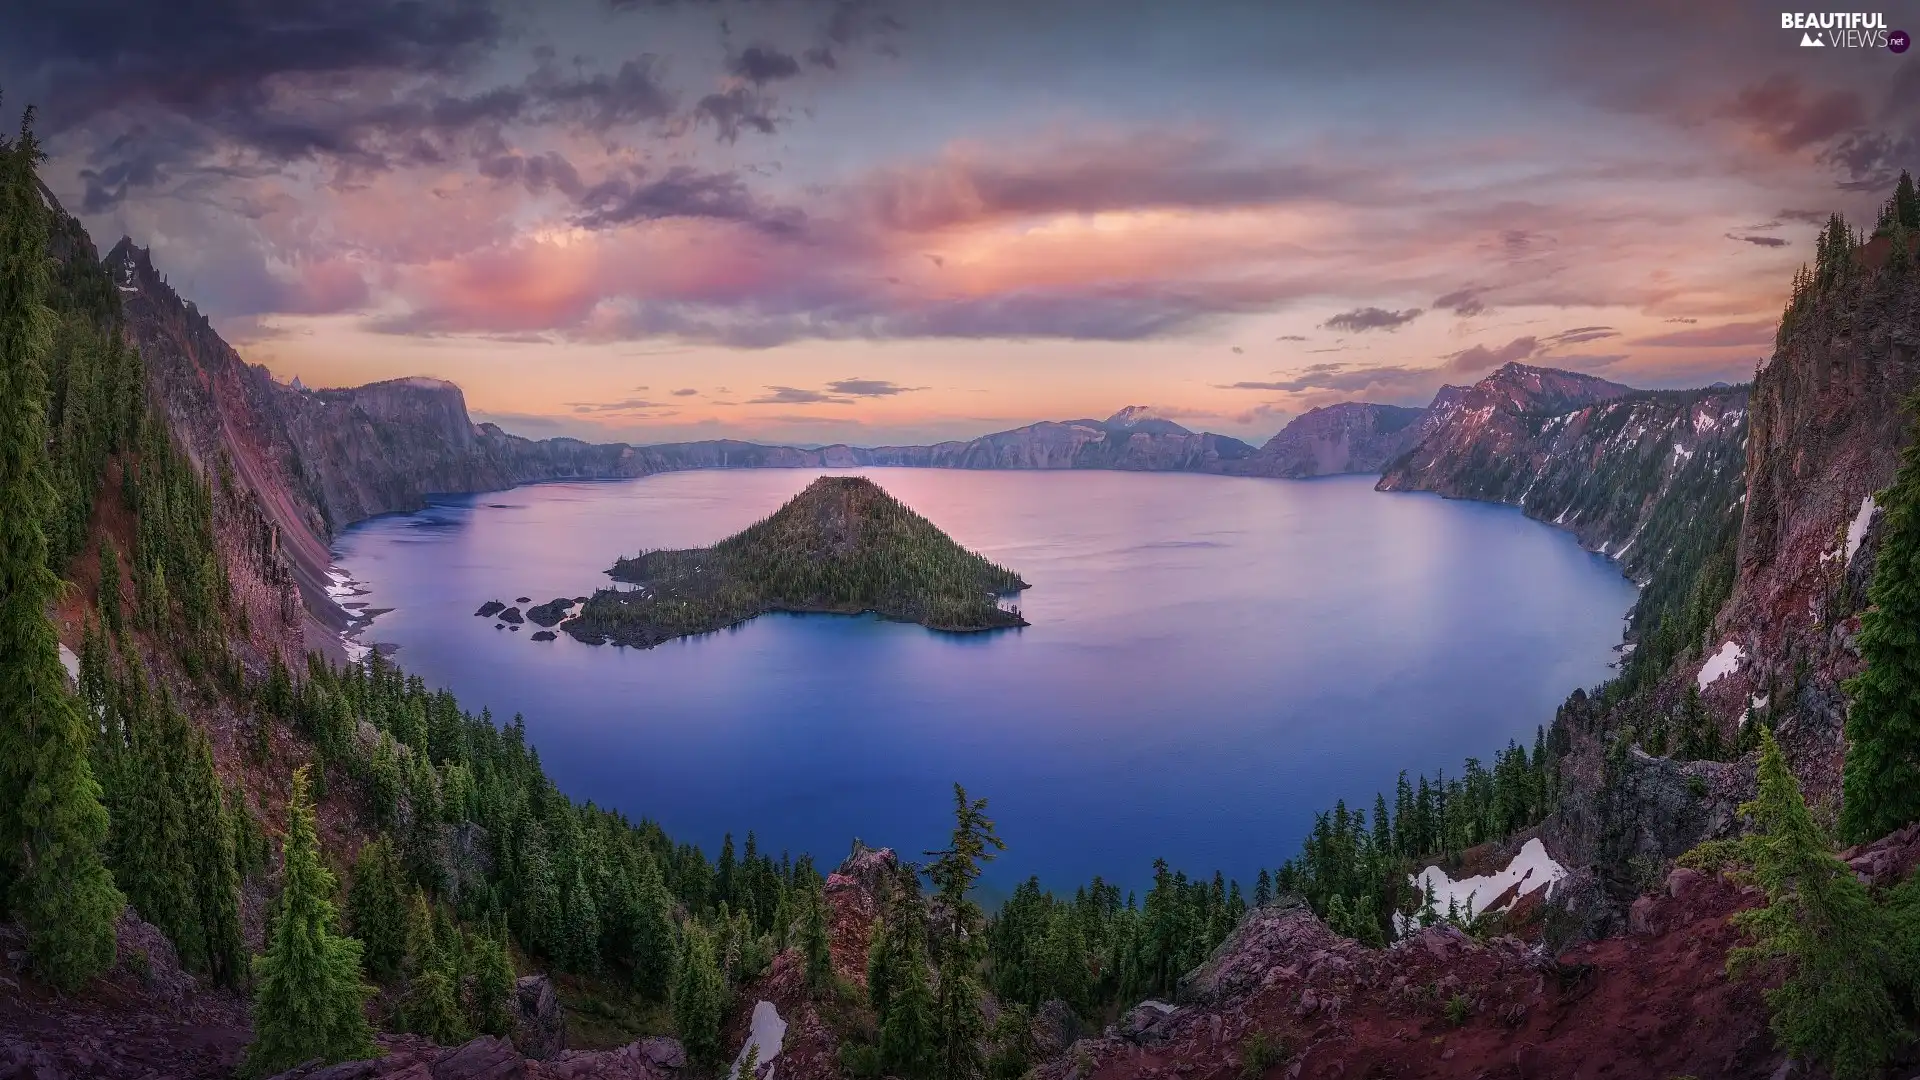 Mountains, Crater Lake National Park, Crater Lake, Island of Wizard, State of Oregon, The United States, viewes, clouds, trees